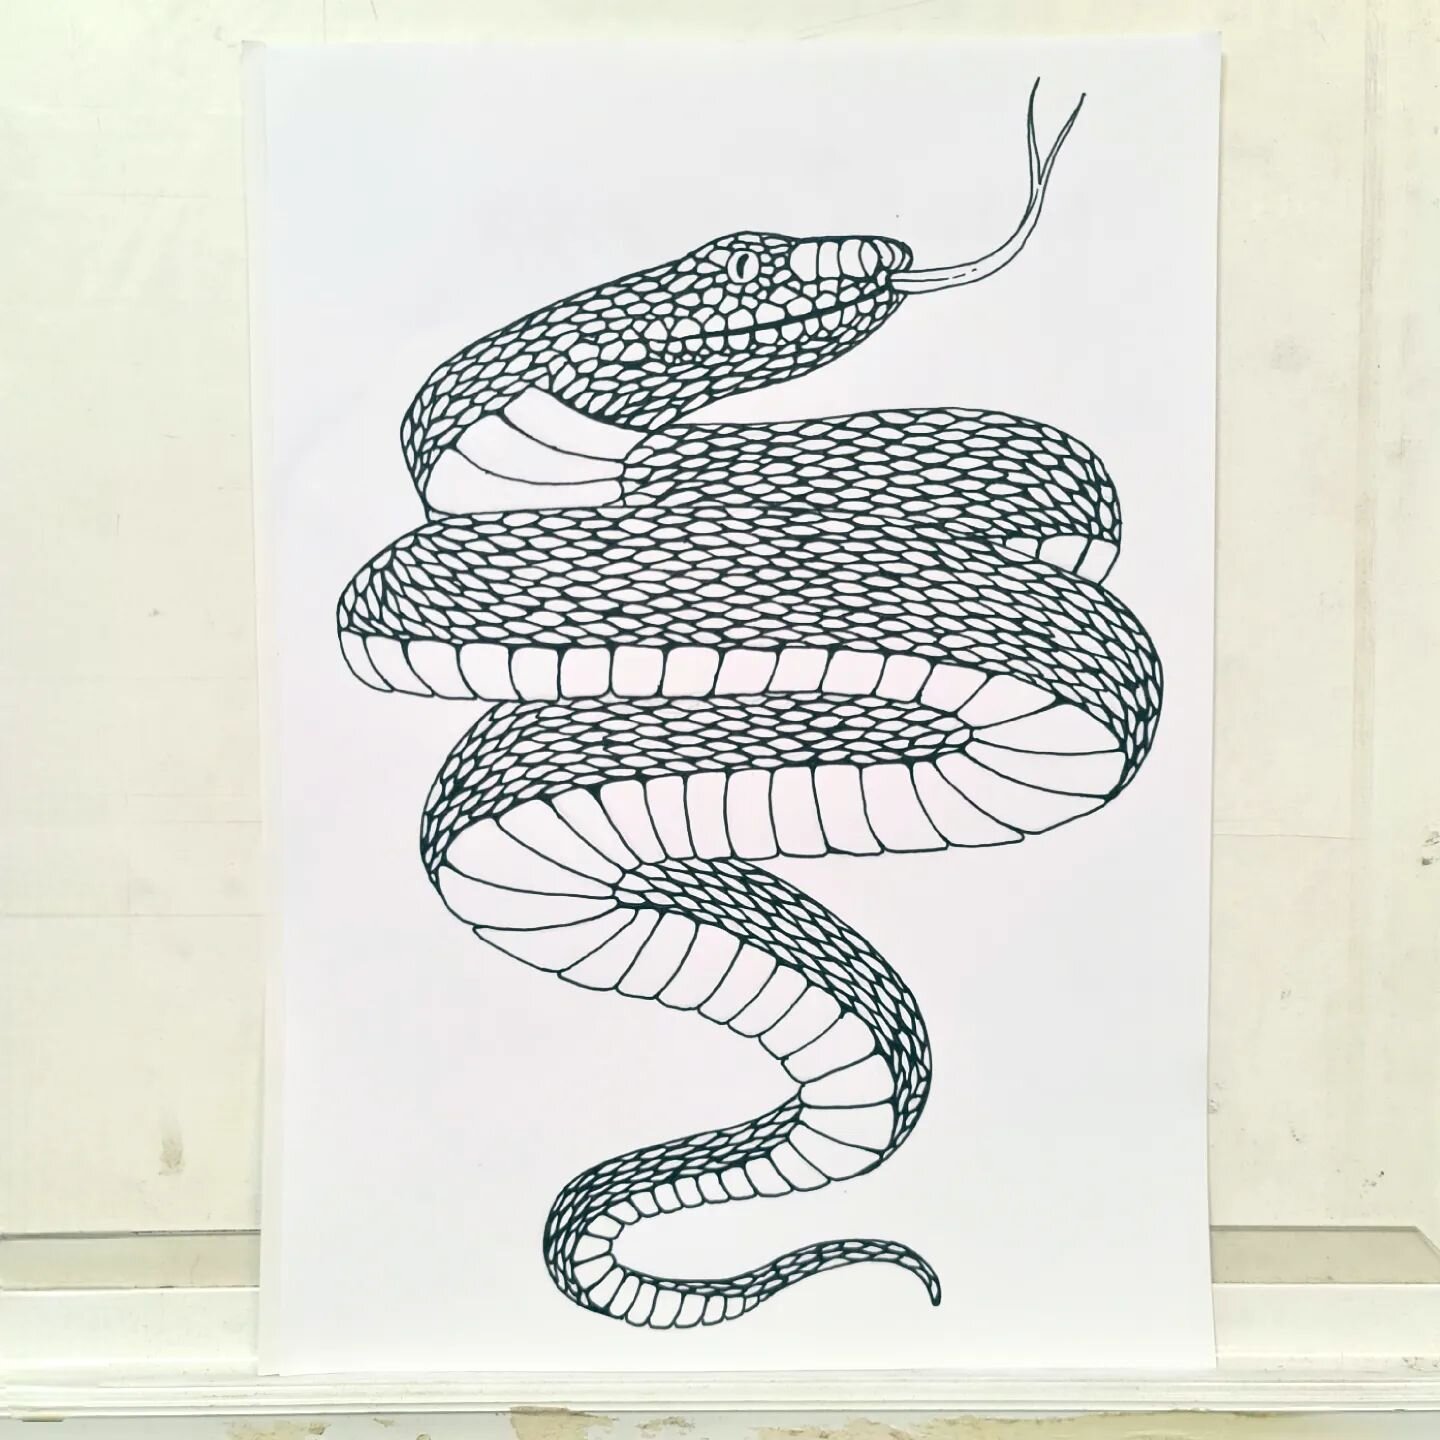 I've drawn this snake out recently based on an Adder. 
It is yet to be shaded, but the shading may also depend on what kind of snake it will become. I can't wait to tattoo this!
.
If you want this snake as a tattoo then please DM @enso.tattoo.enso an